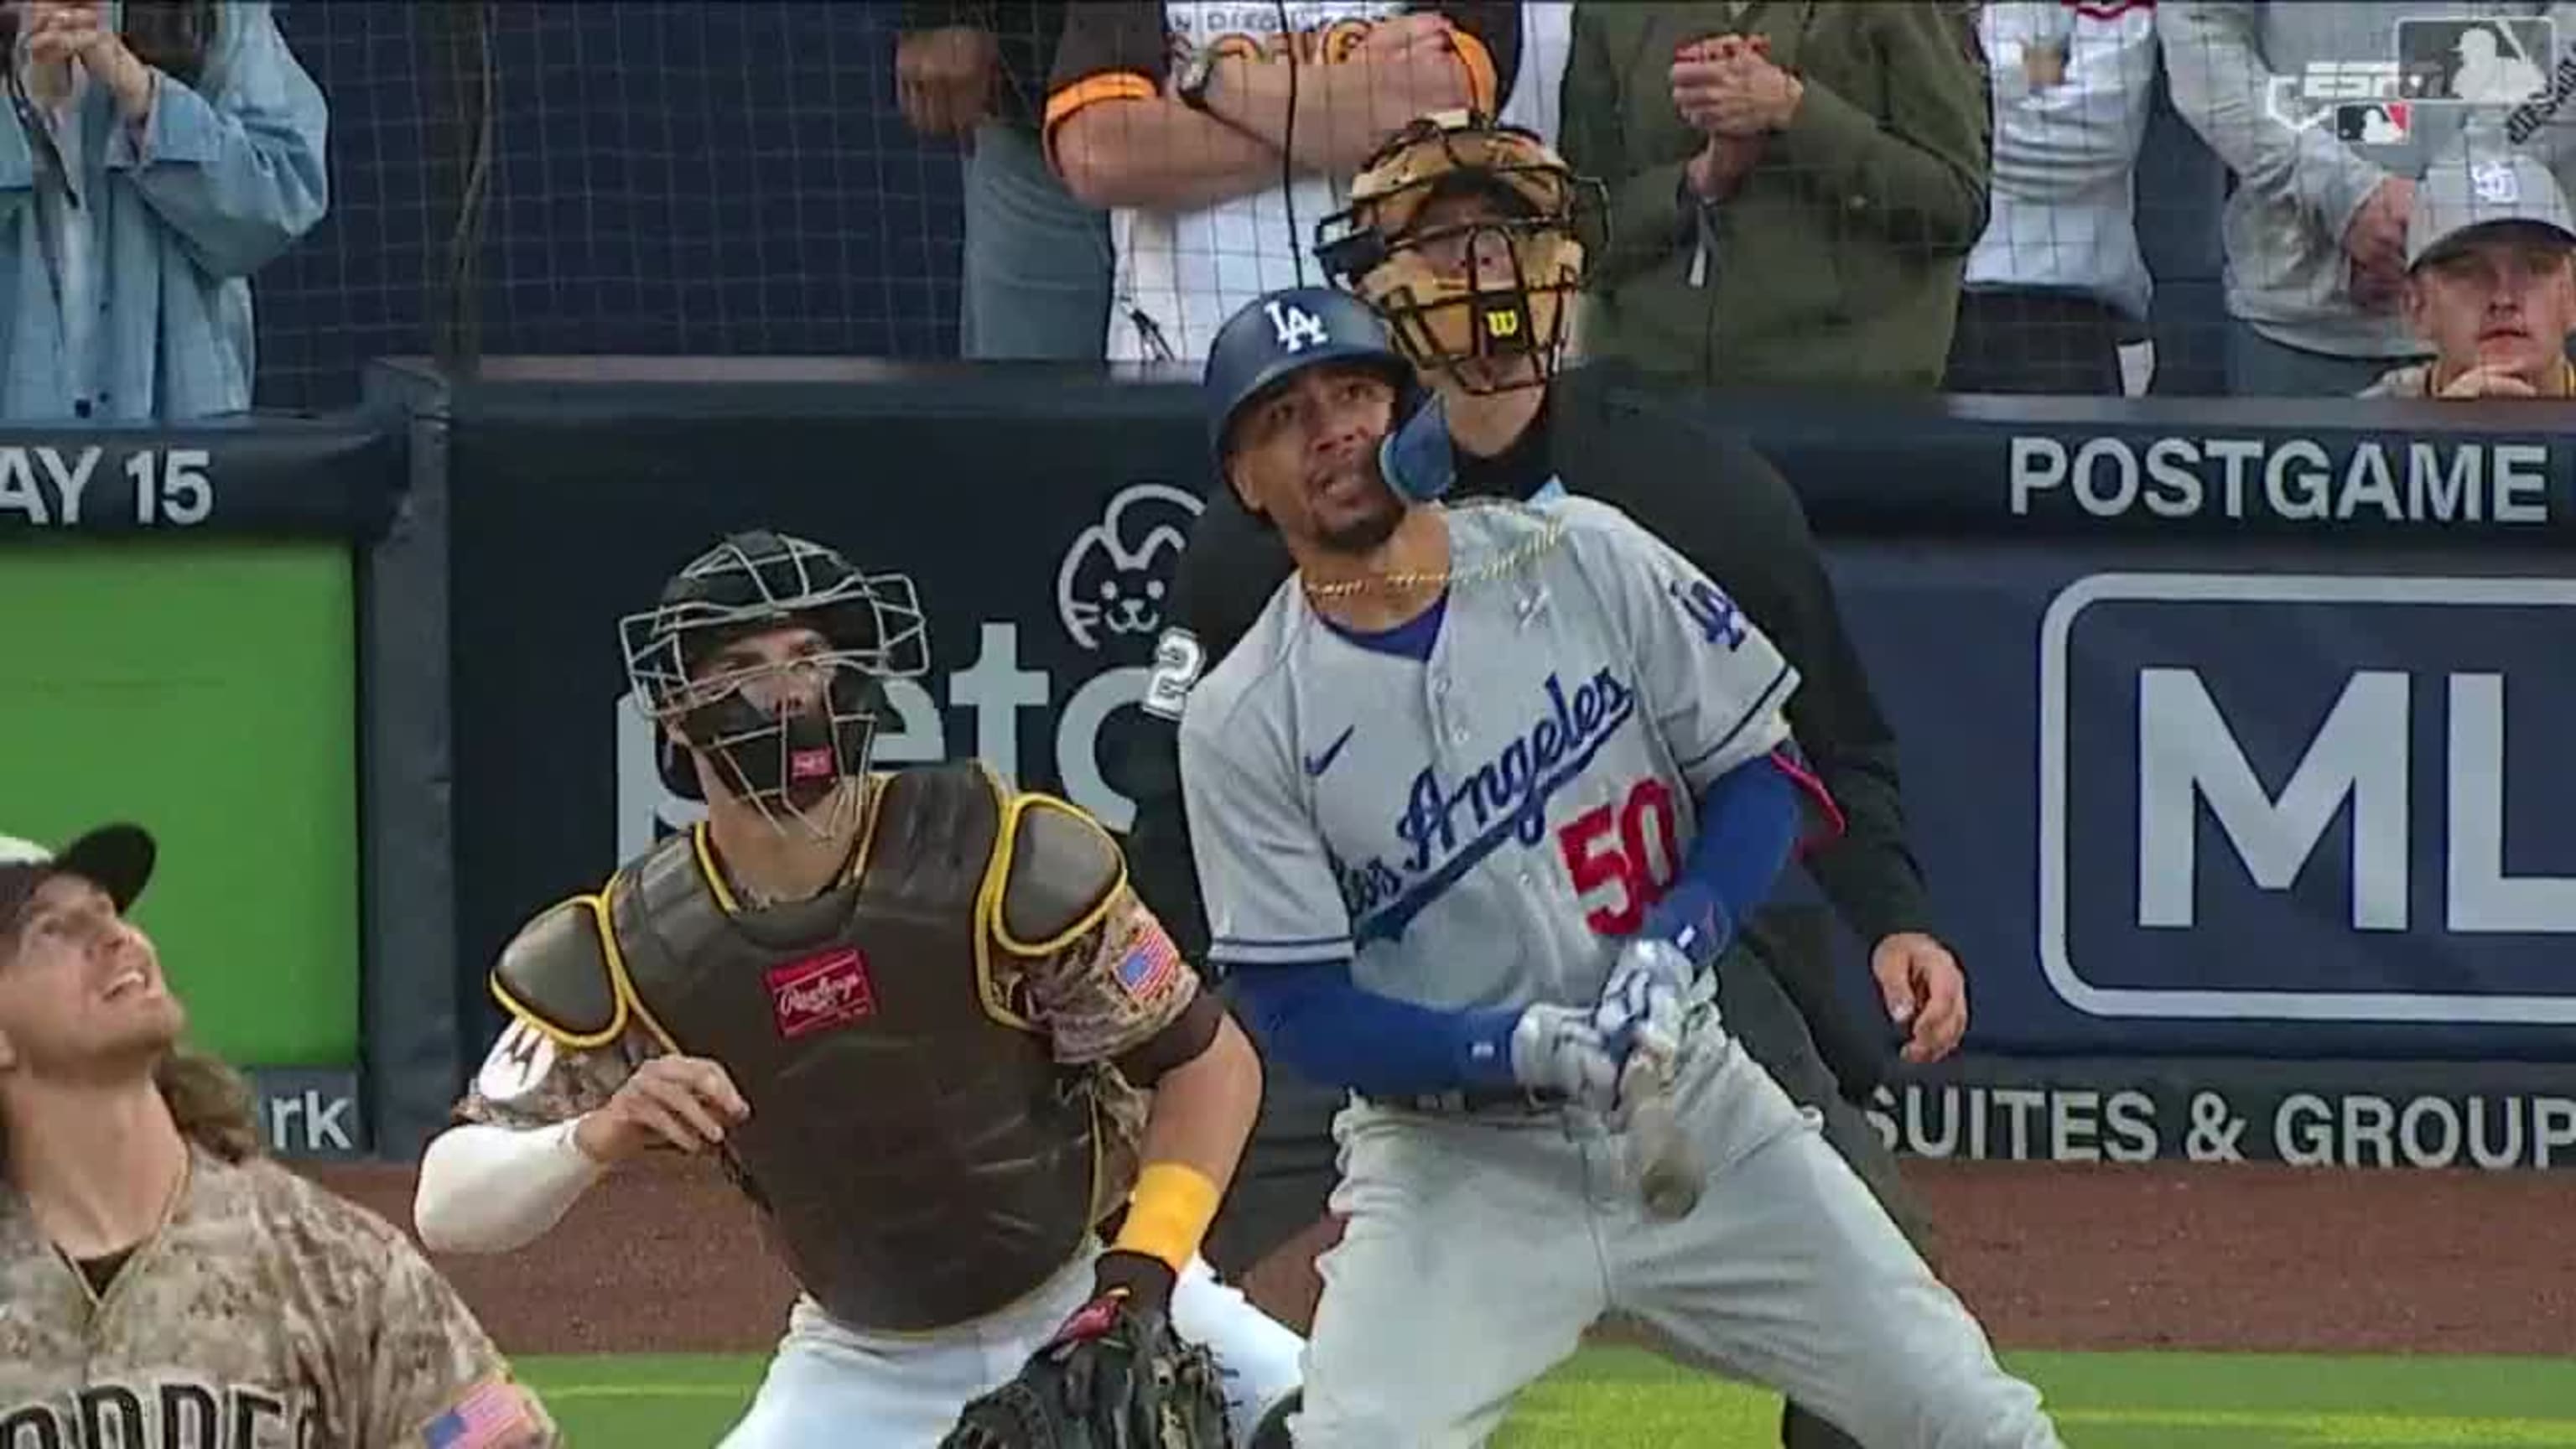 Betts, Outman homer as Dodgers stun Padres 5-2 – WATE 6 On Your Side